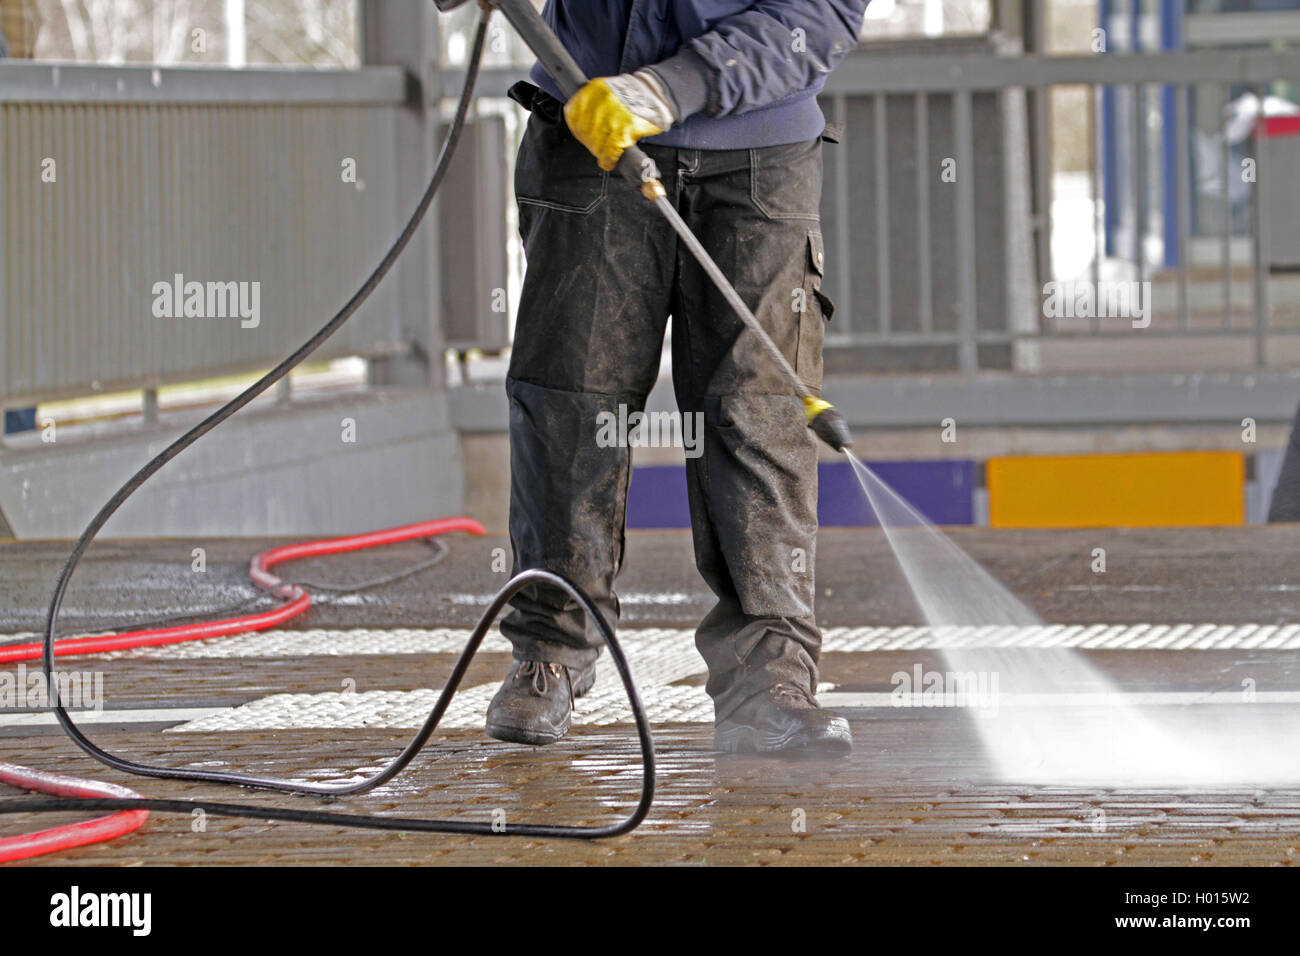 cleaning ways with pressure washer, Germany Stock Photo